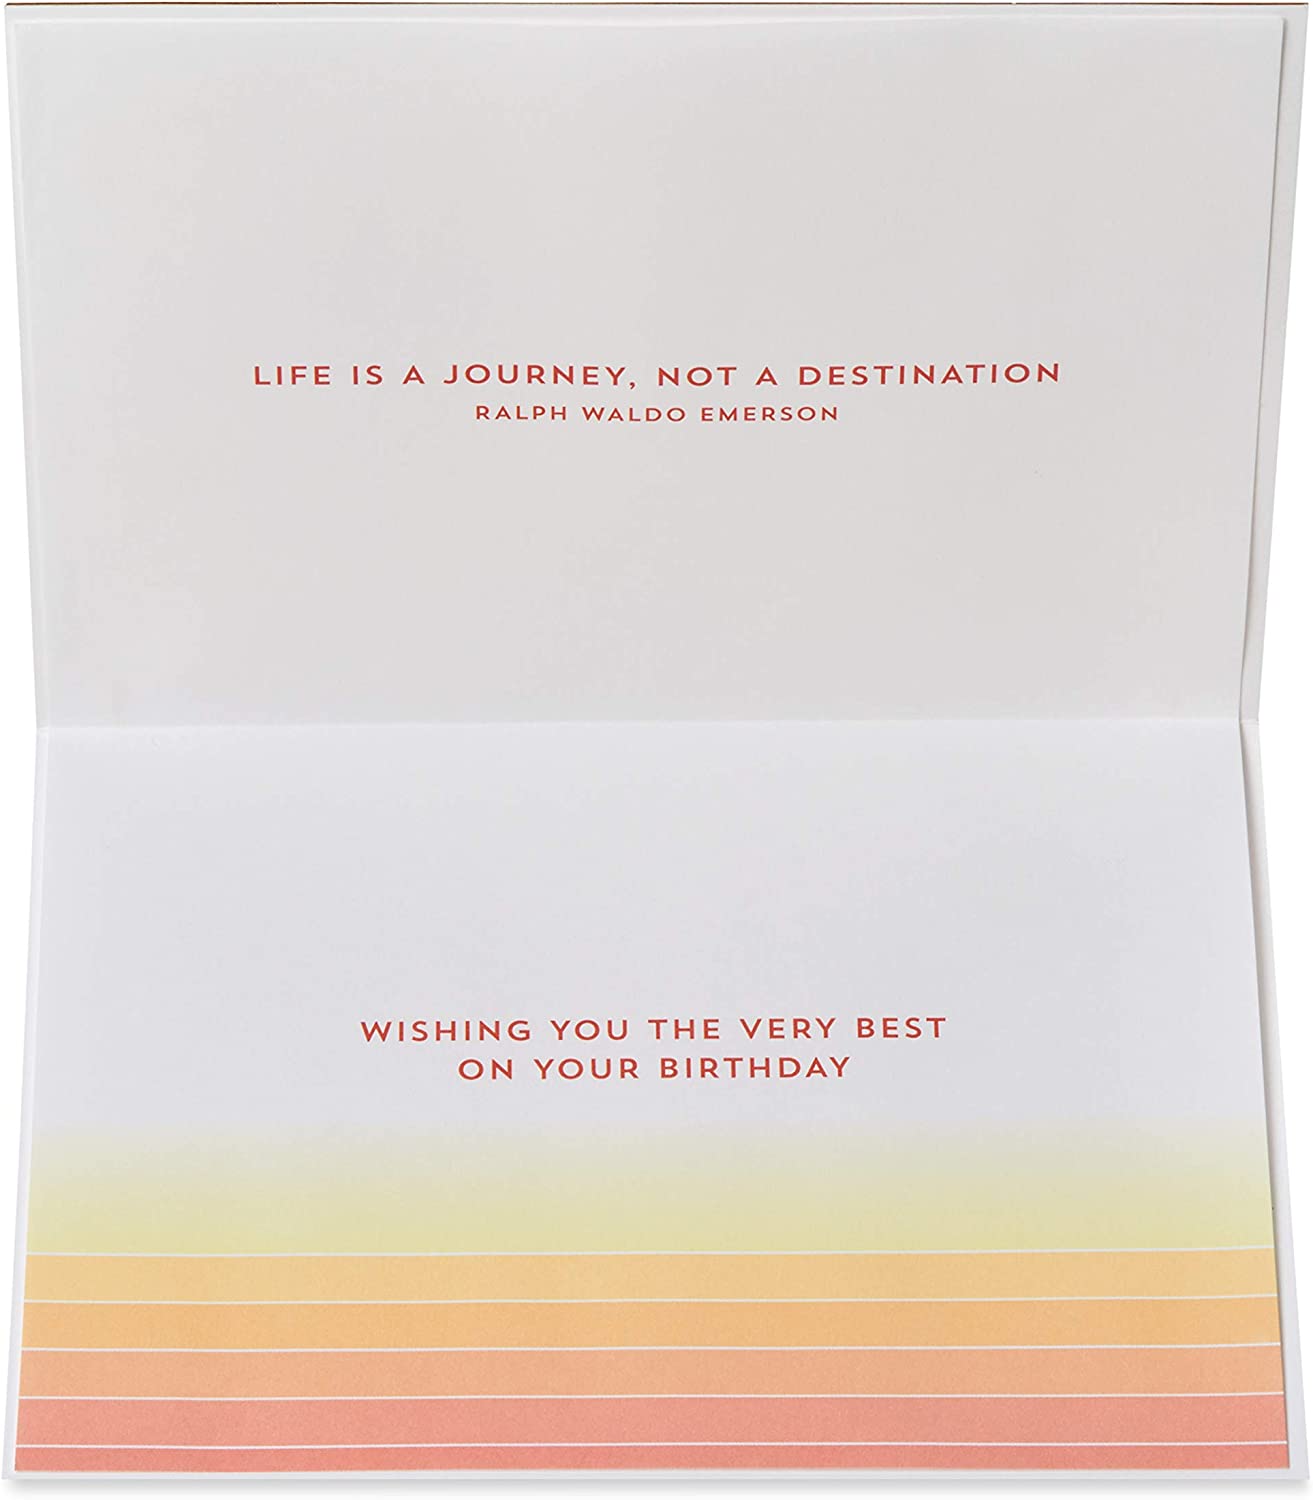 Papyrus Birthday Card (Life Is A Journey)